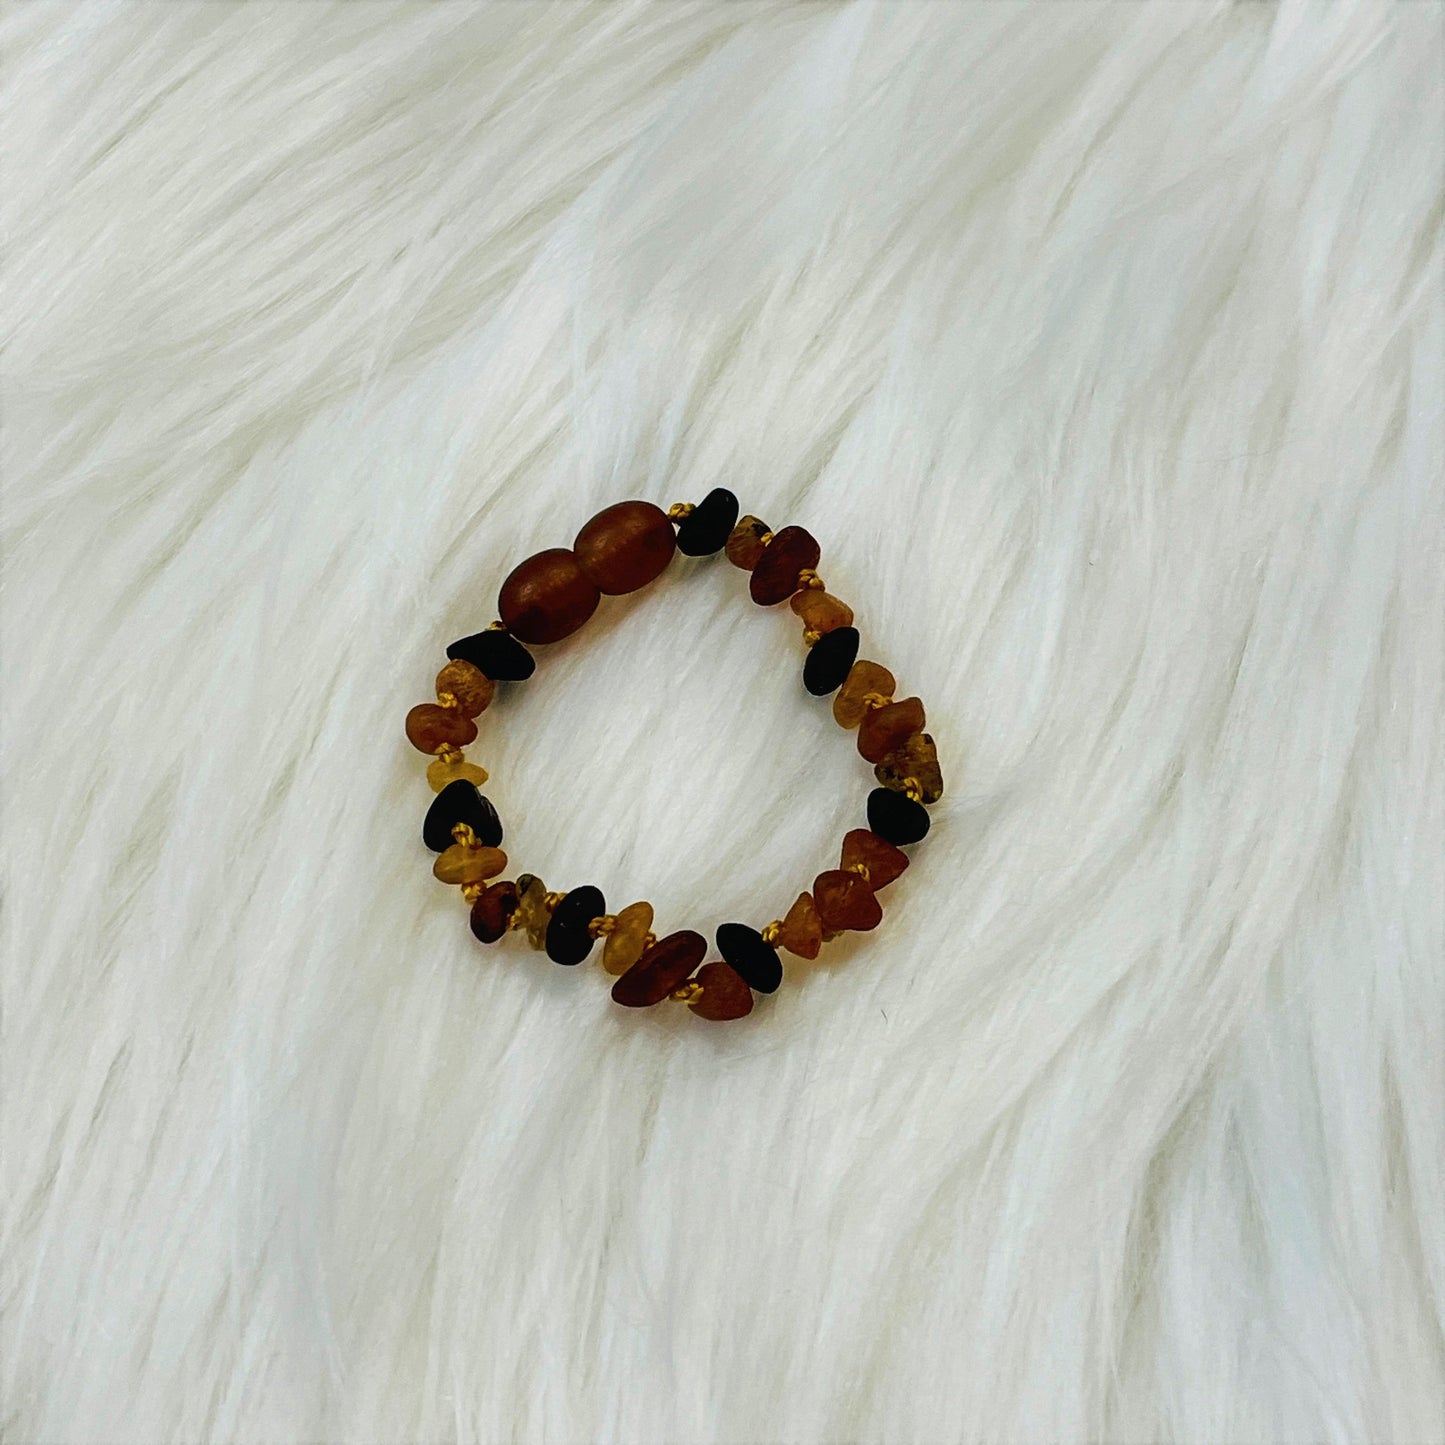 Authentic Lithuanian Baltic Amber Unpolished Multi Anklet - 4.5"